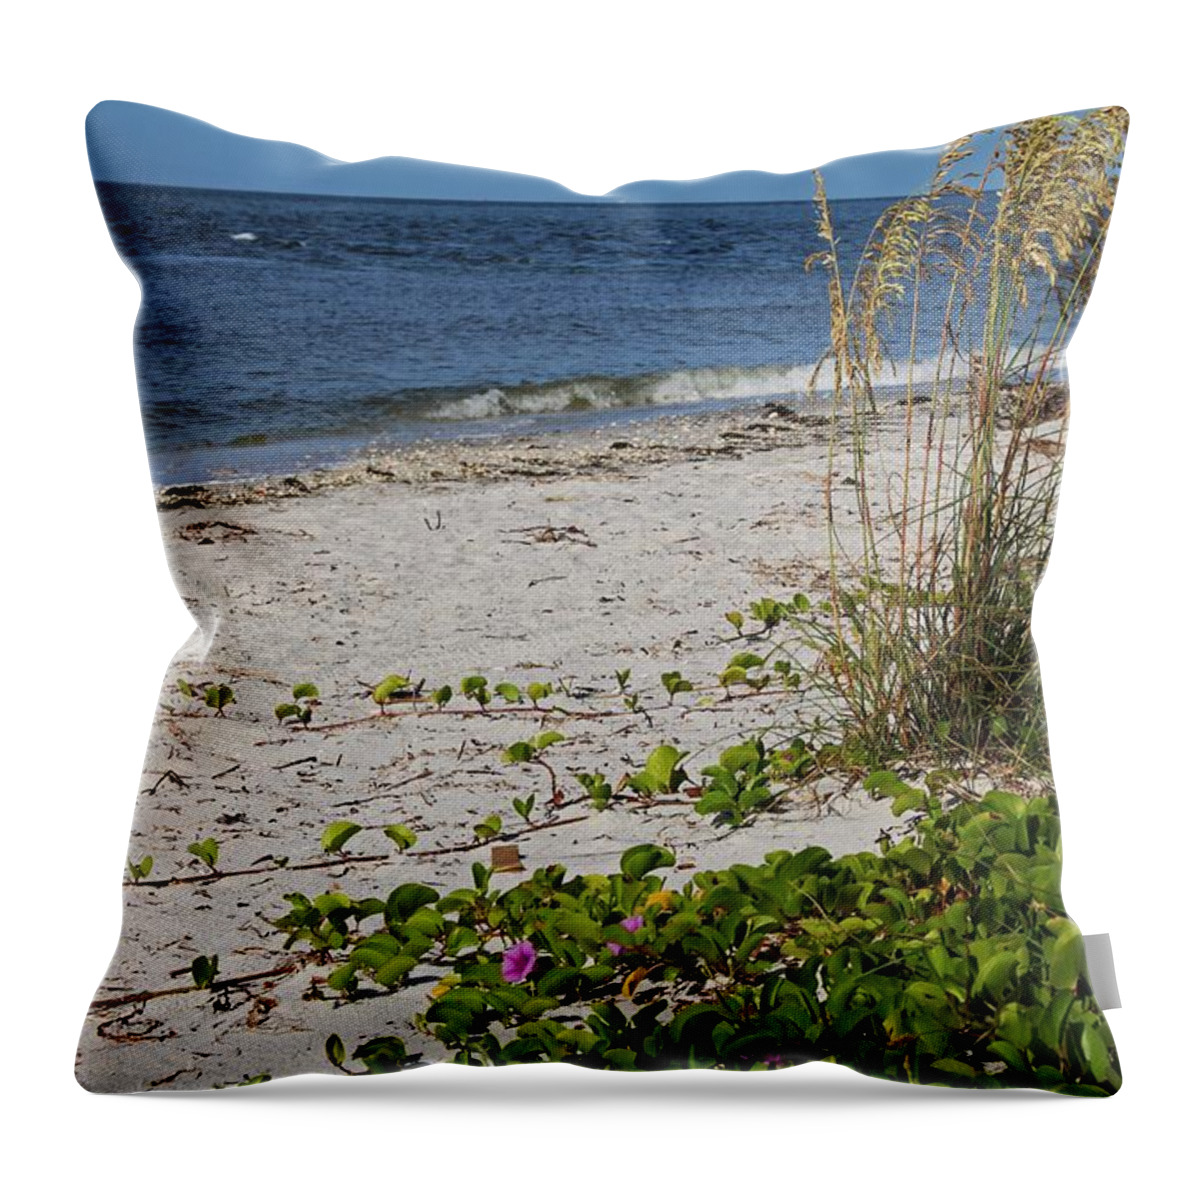 Gulf Of Mexico Throw Pillow featuring the photograph Nothing Incomplete by Michiale Schneider